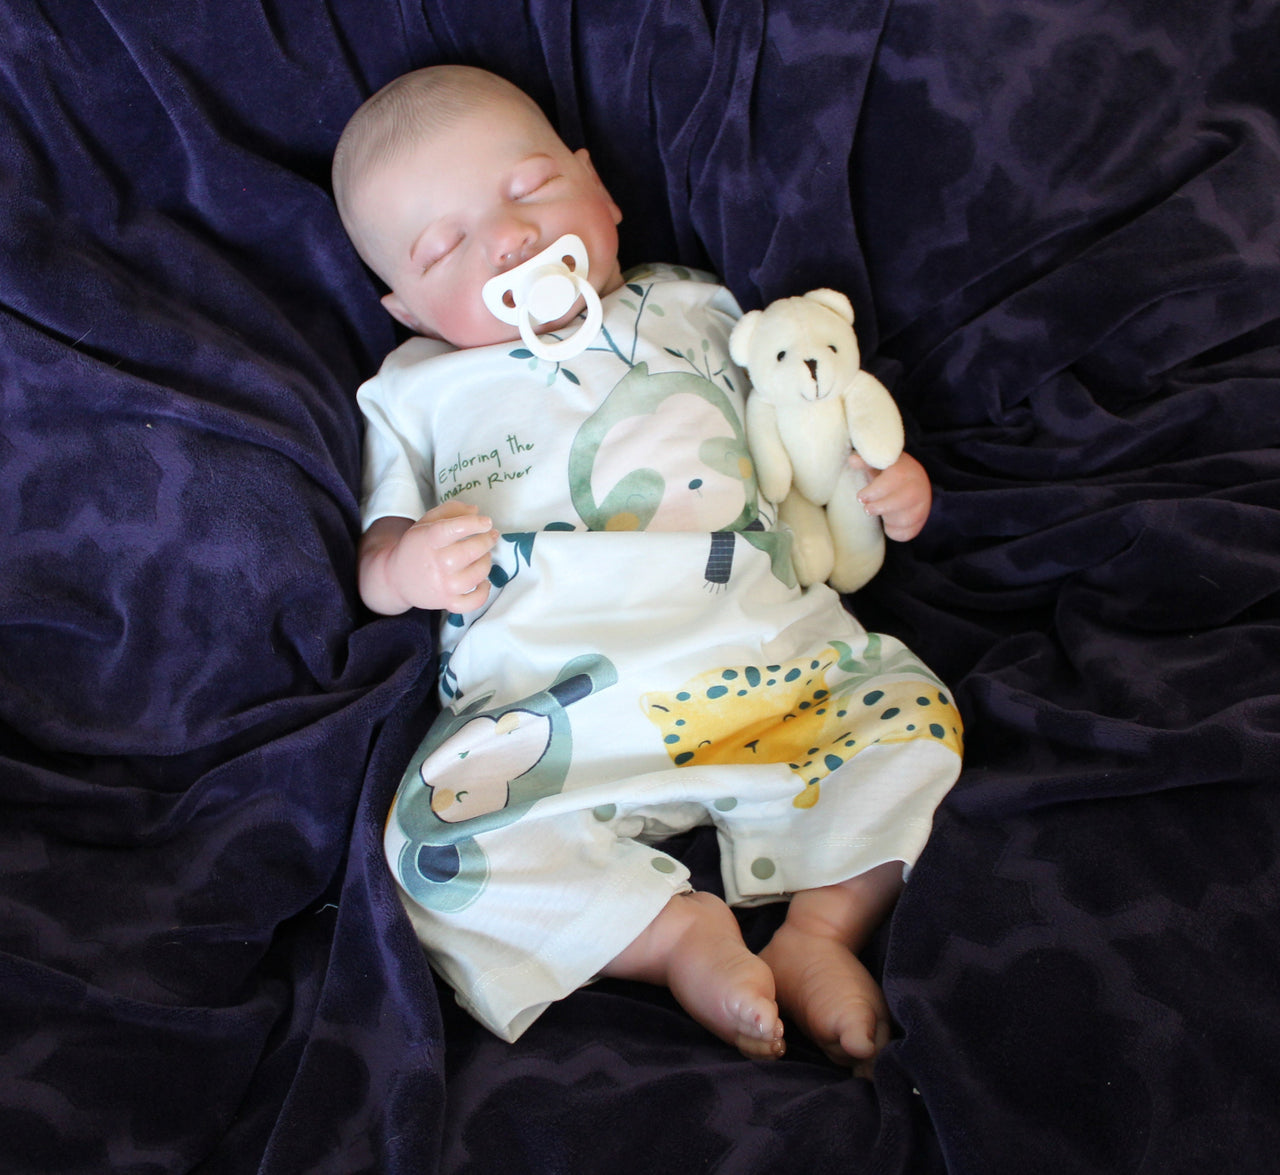 2 to 8 Pounds Lifelike Reborn Baby Doll, 20 inch Weighted Newborn Baby Boy, Soft vinyl, Heavy Baby Dolls, For Children, Child Friendly Gifts For Girls